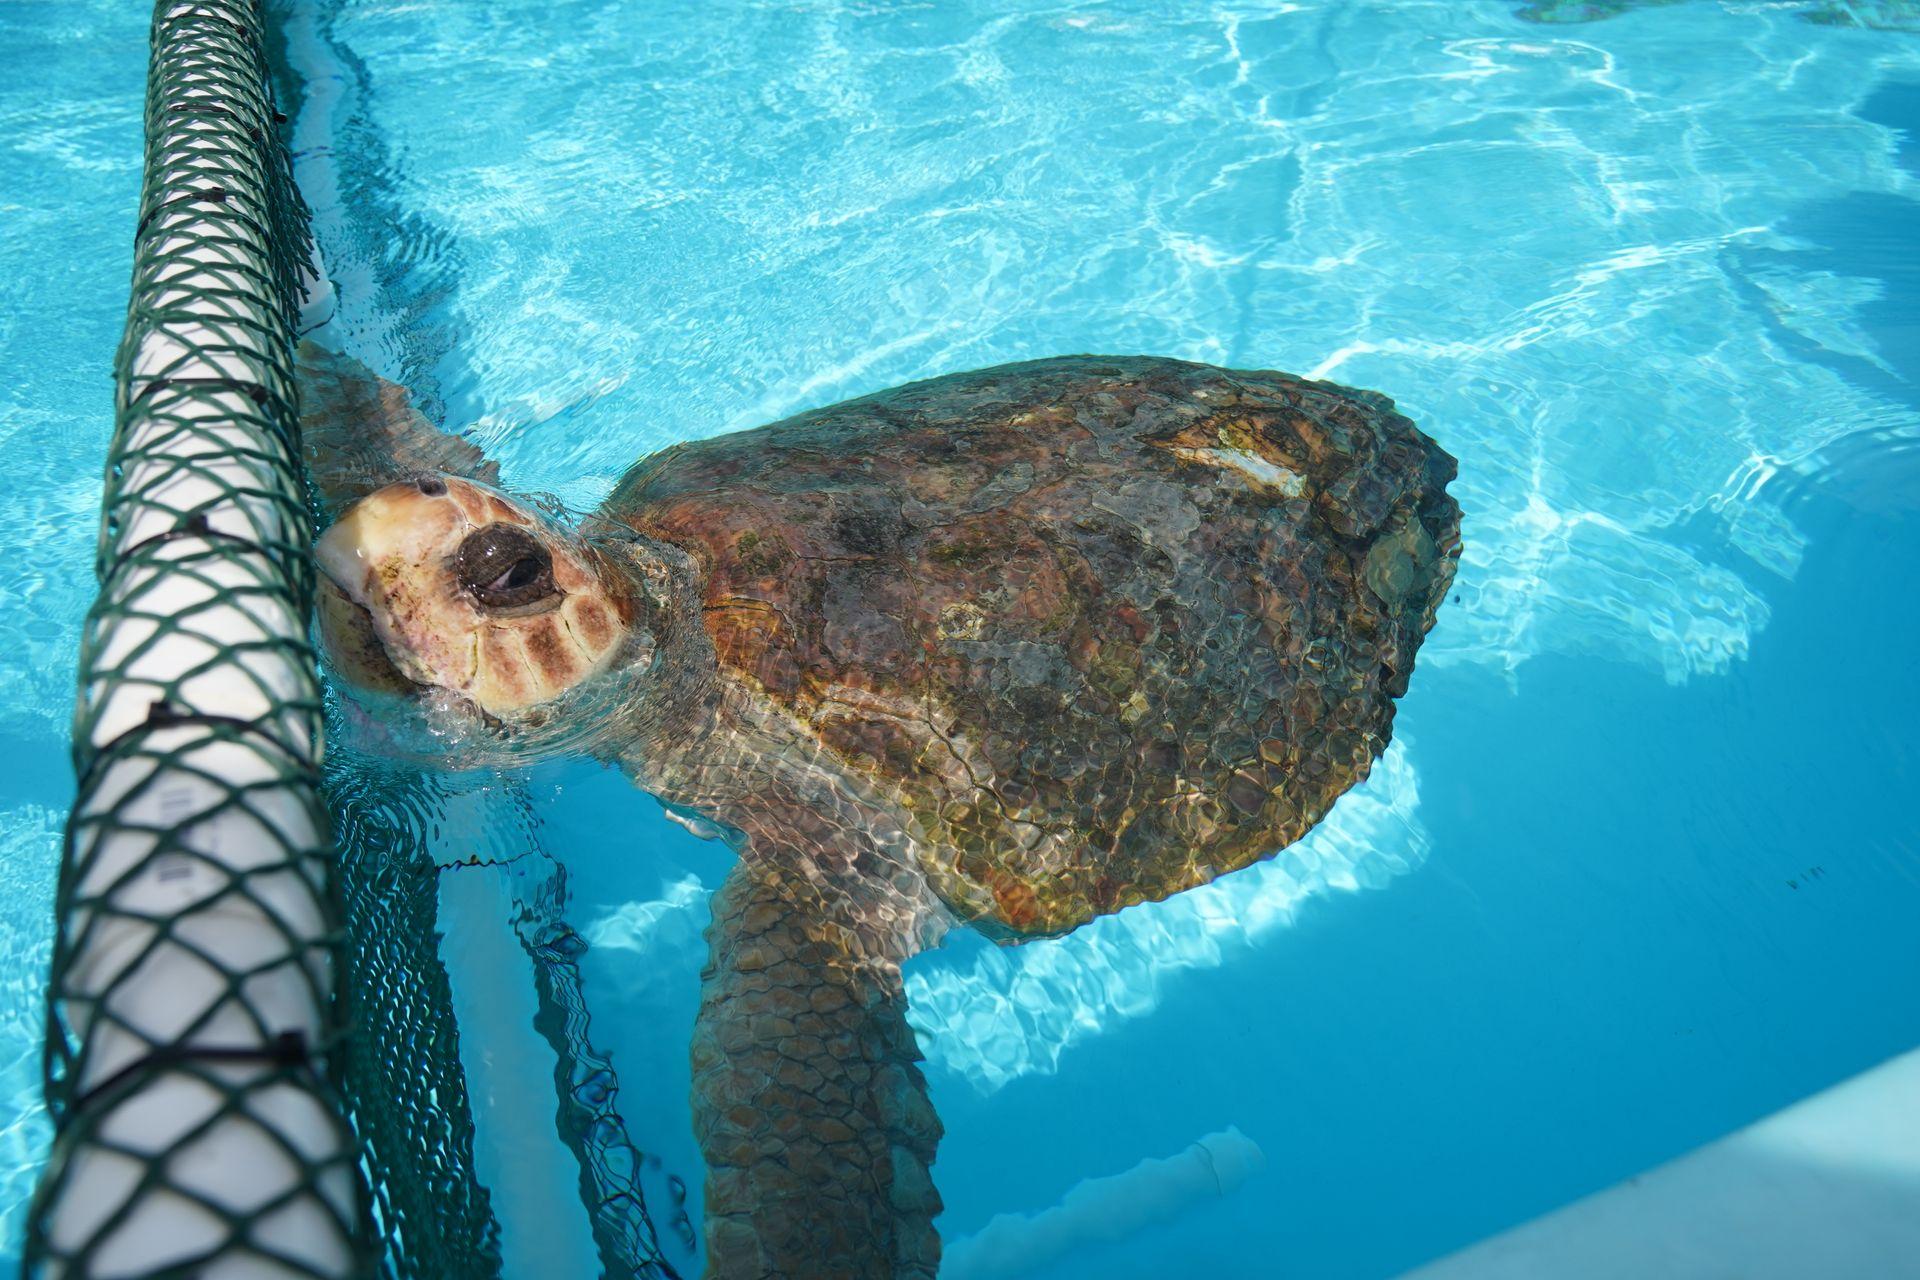 A large sea turtle swimming in aqua blue water at the Turtle Hospital